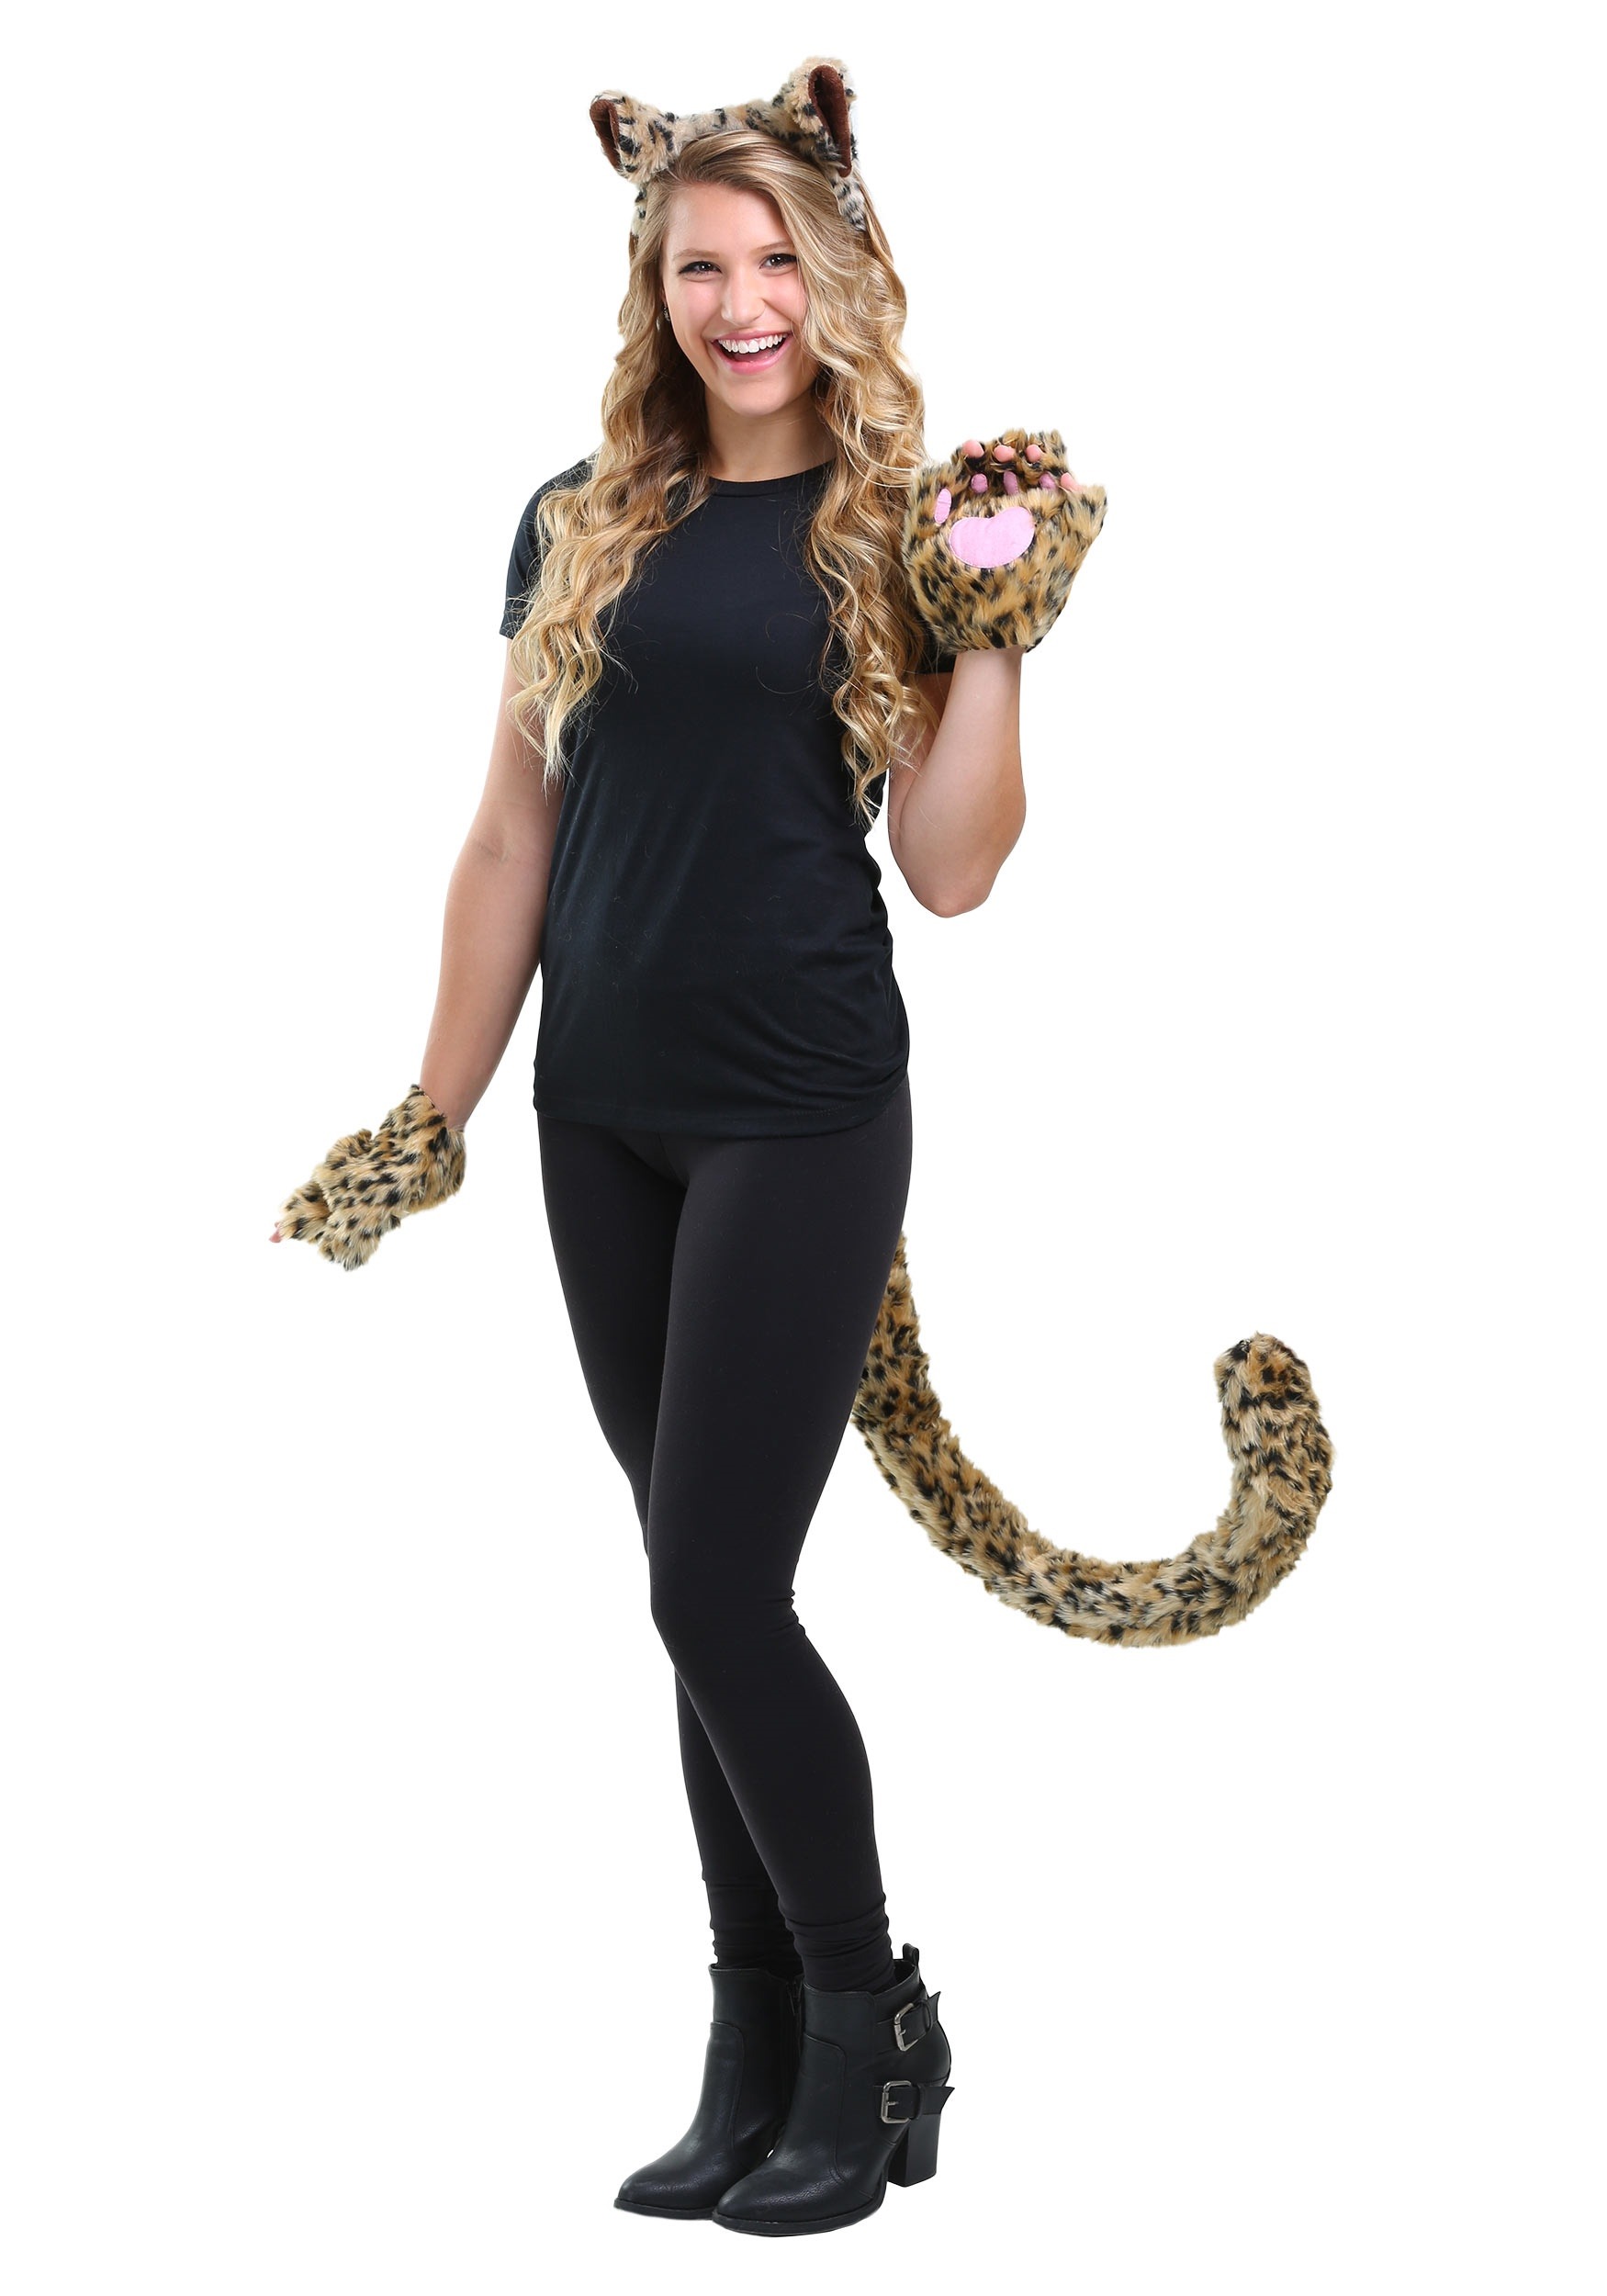 Be Unforgettable with Leopard Costume Aesthetic